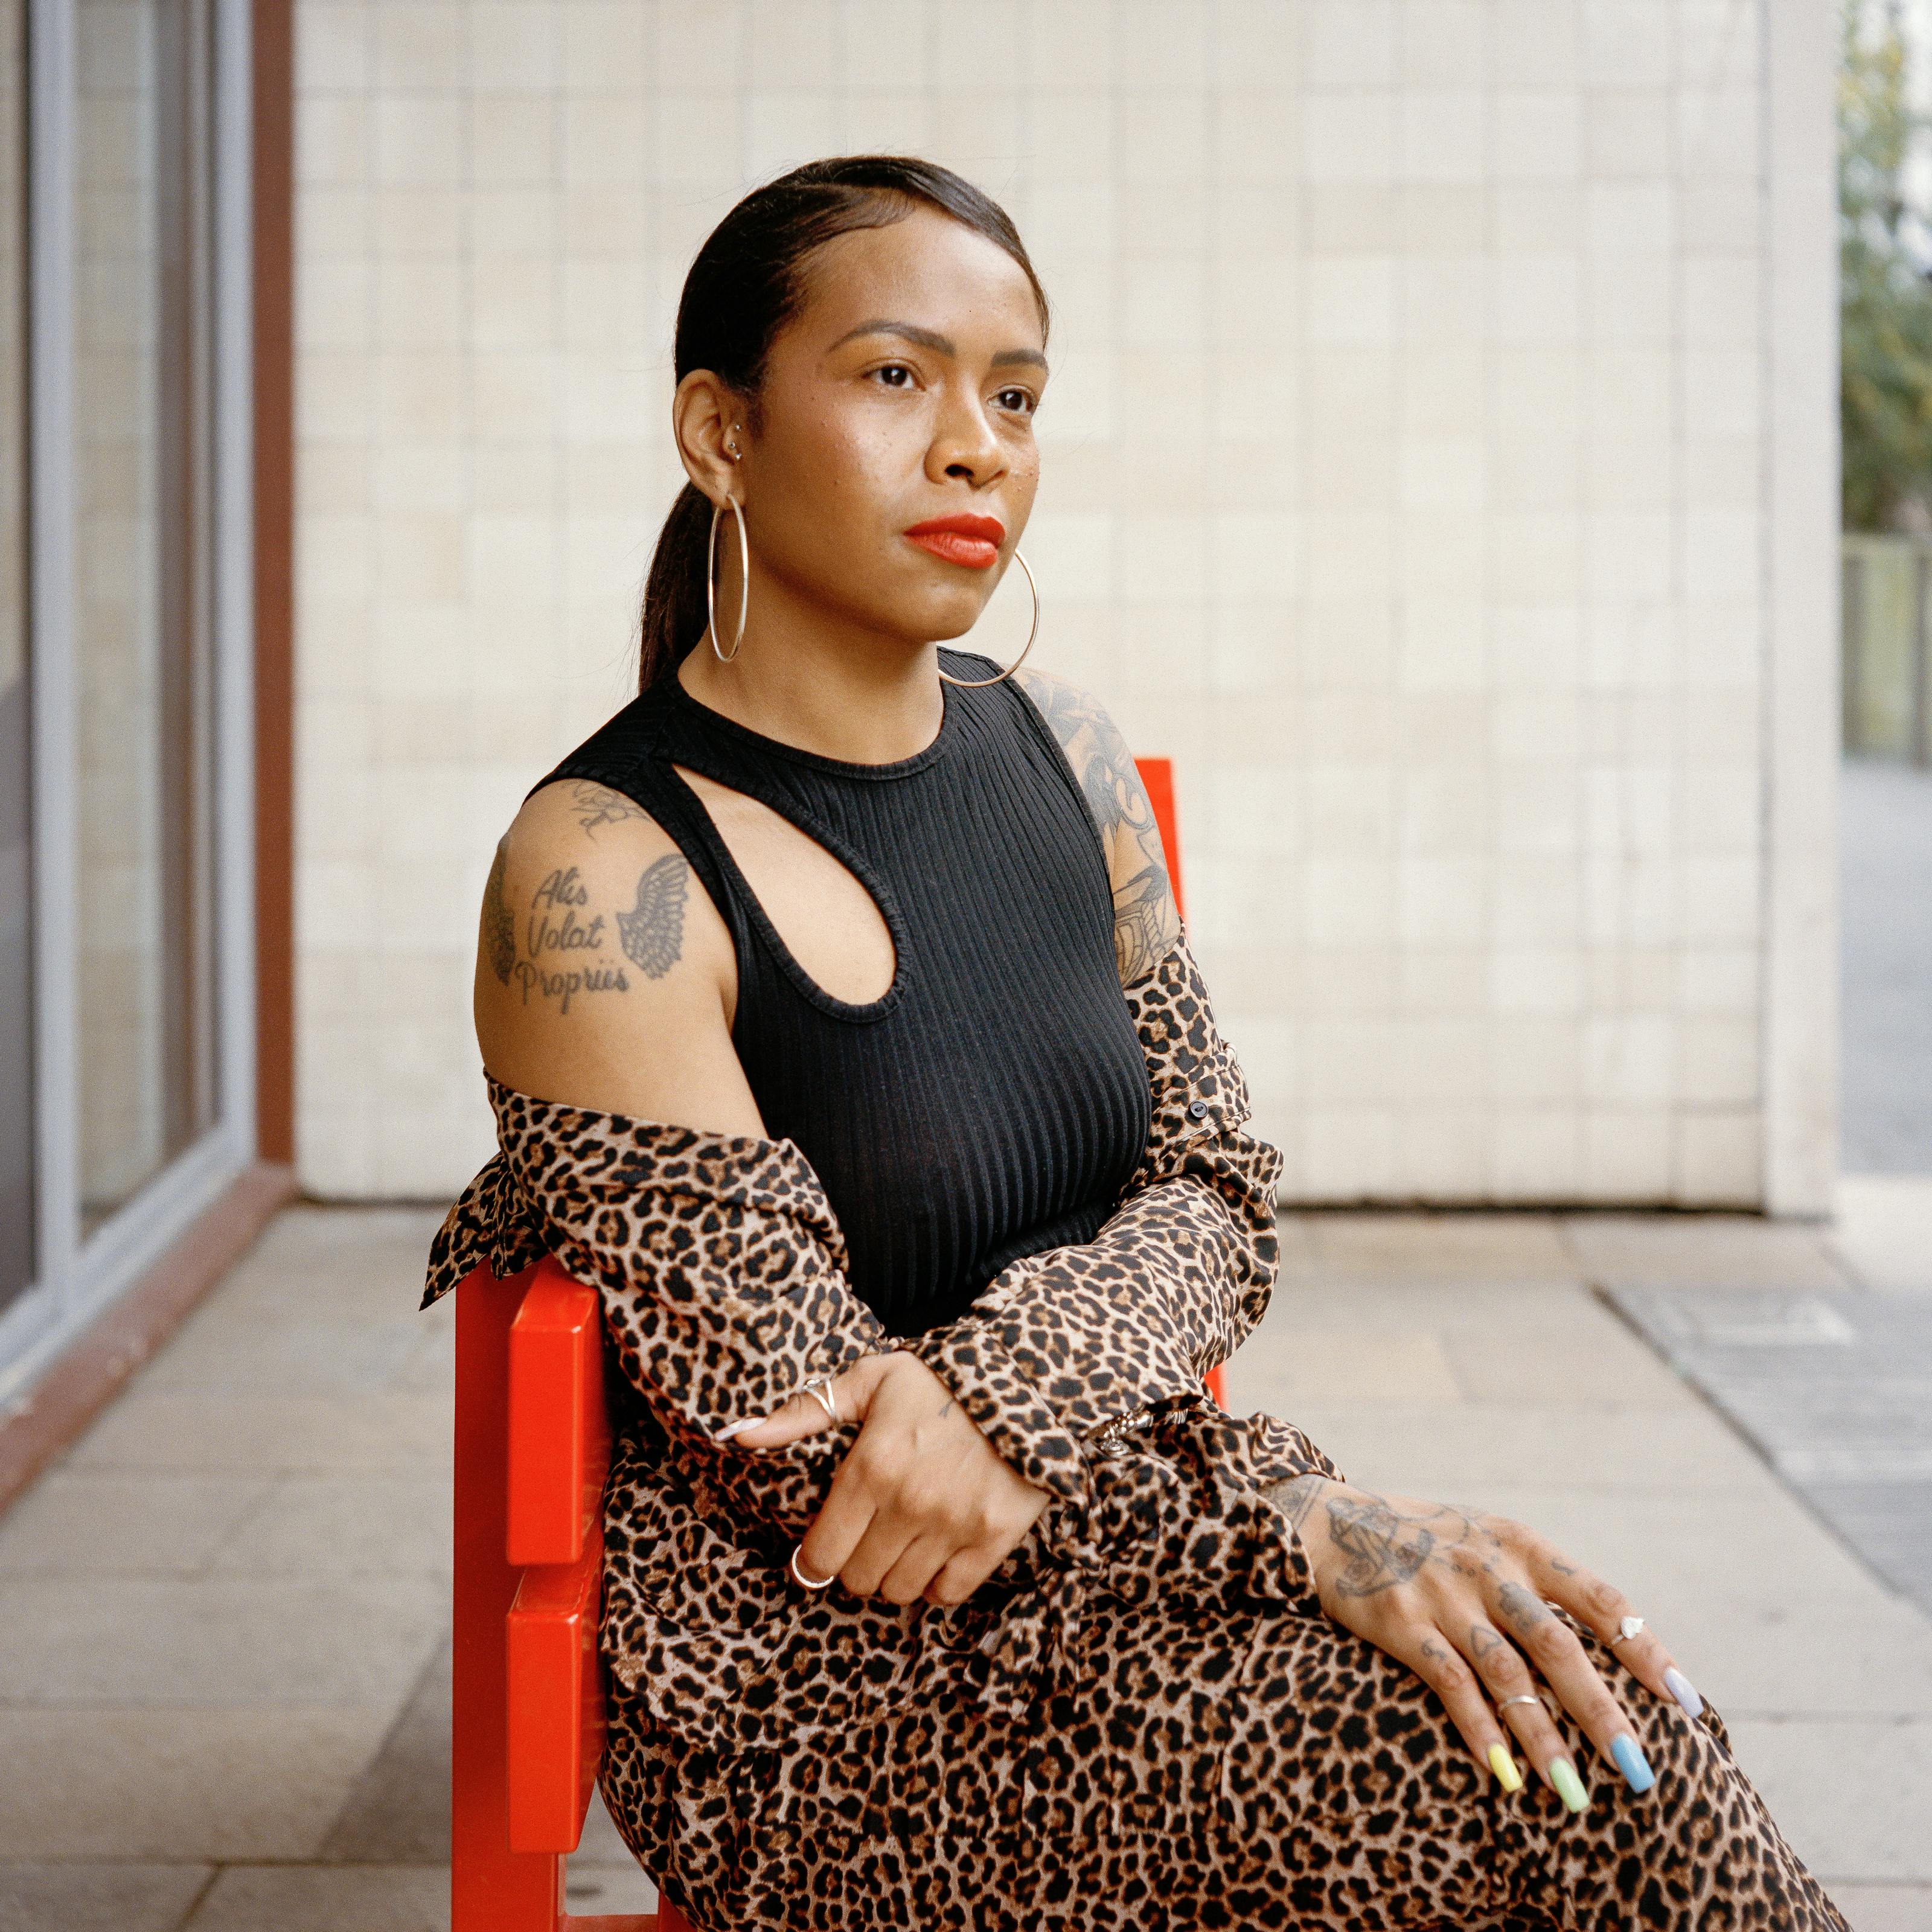 Portrait photo of Lauren,  a young woman with black hair, sitting on an orange bench outside. She has several tattoos on her arms and is wearing a black sleeveless top, leopard print shirt and a leopard print skirt. She has large hoop earrings and is wearing an orange red lipstick. Her nails are painted in a variety of colours.

She is looking into the distance, slightly smiling. Behind her, there is a building and a tiled wall. 